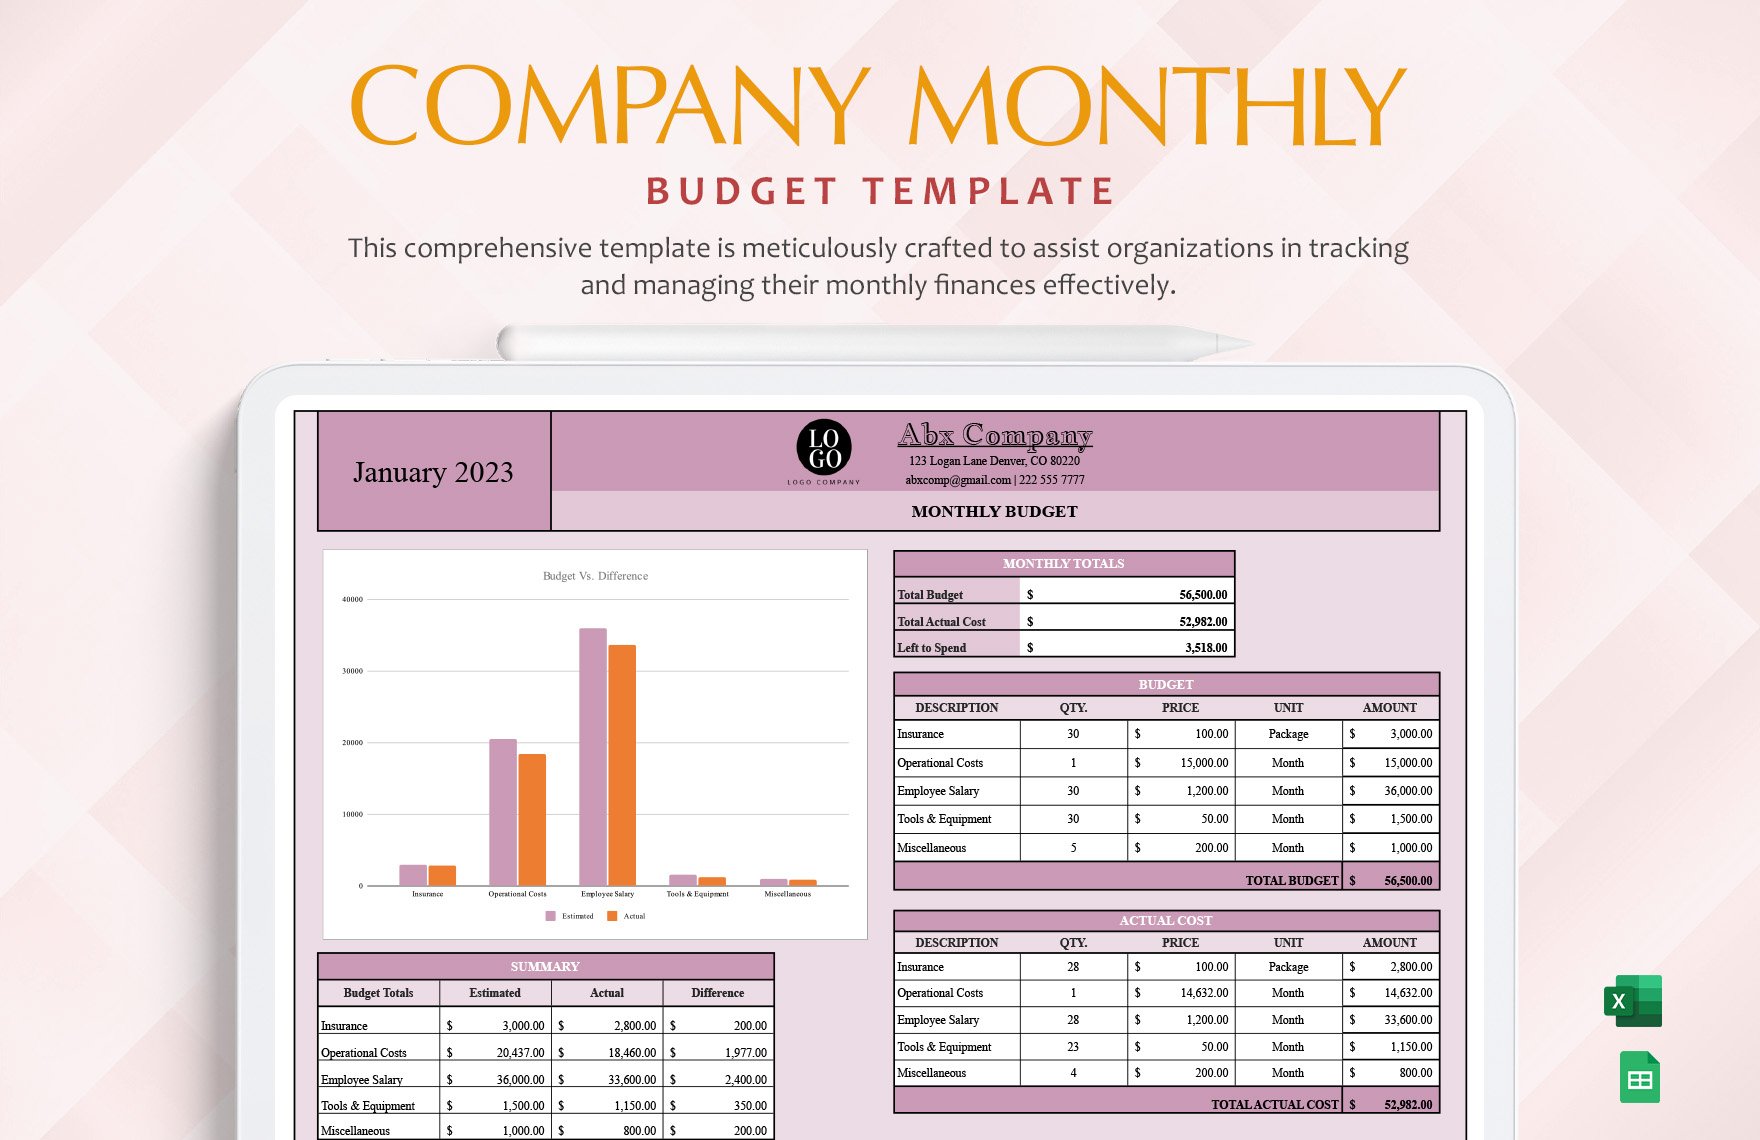 Company Monthly Budget Template in Excel, Google Sheets